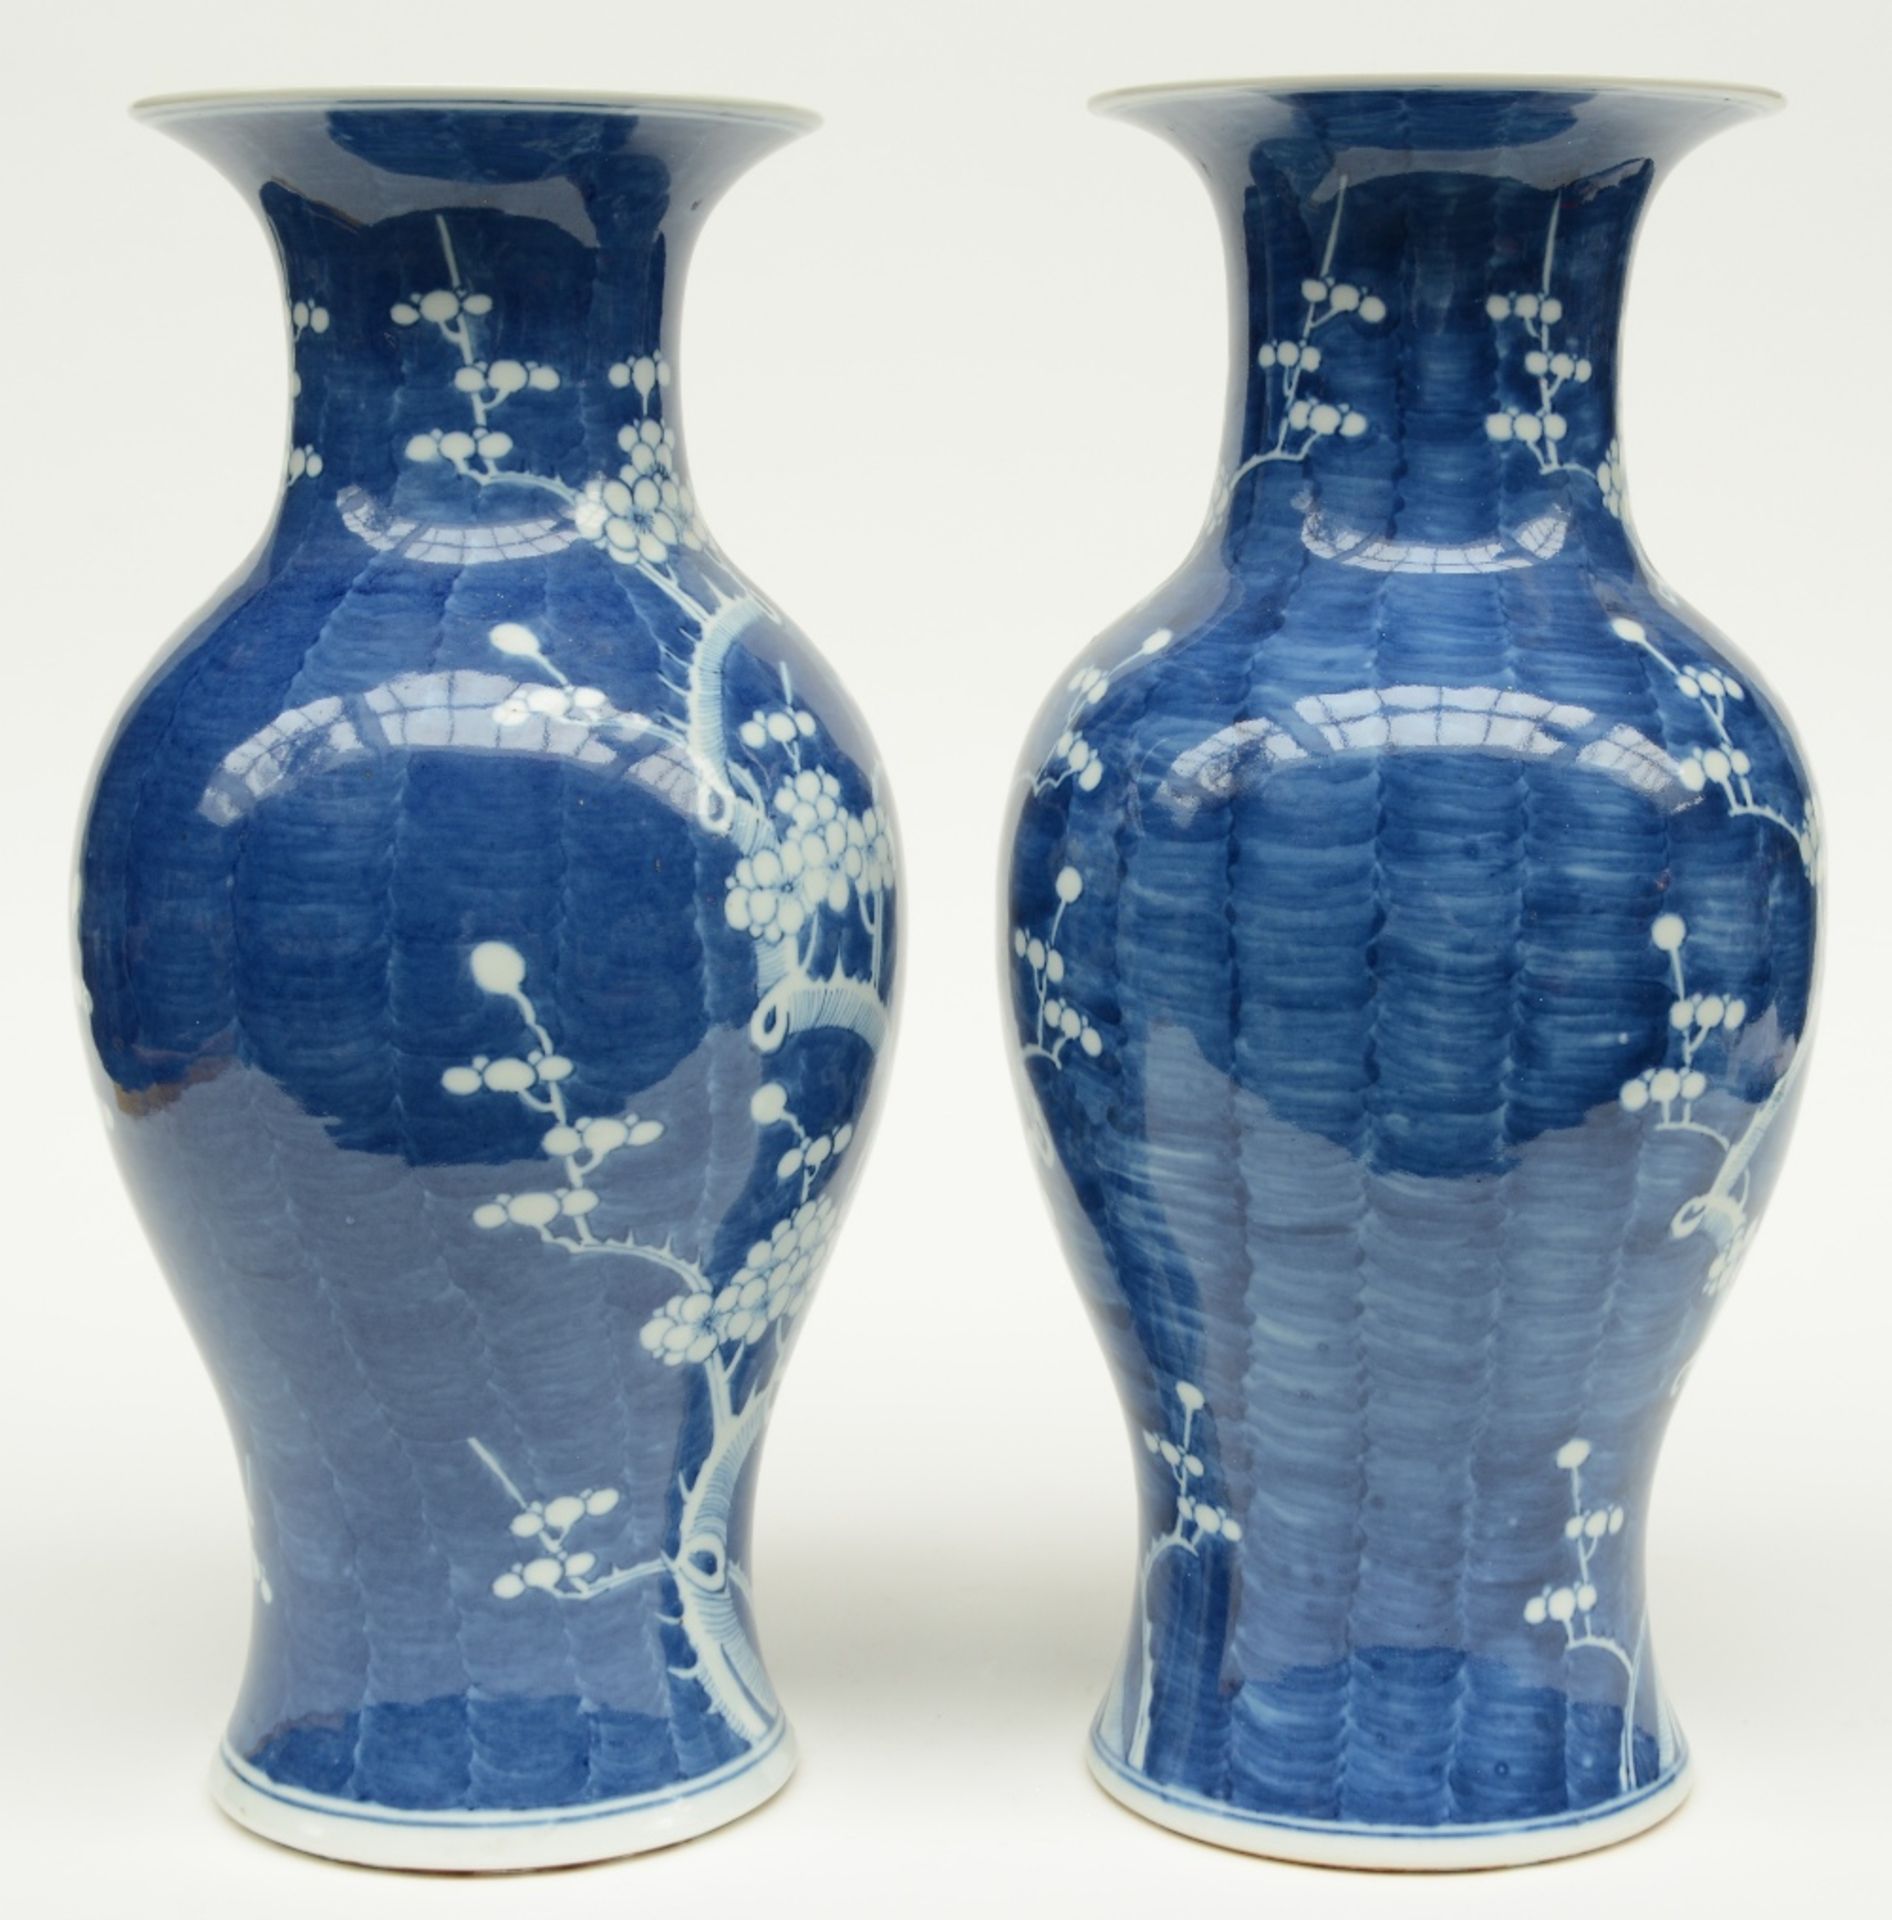 A pair of Chinese blue and white decorated vases painted with prunus blossoms, H 42,5 cm - Image 2 of 6